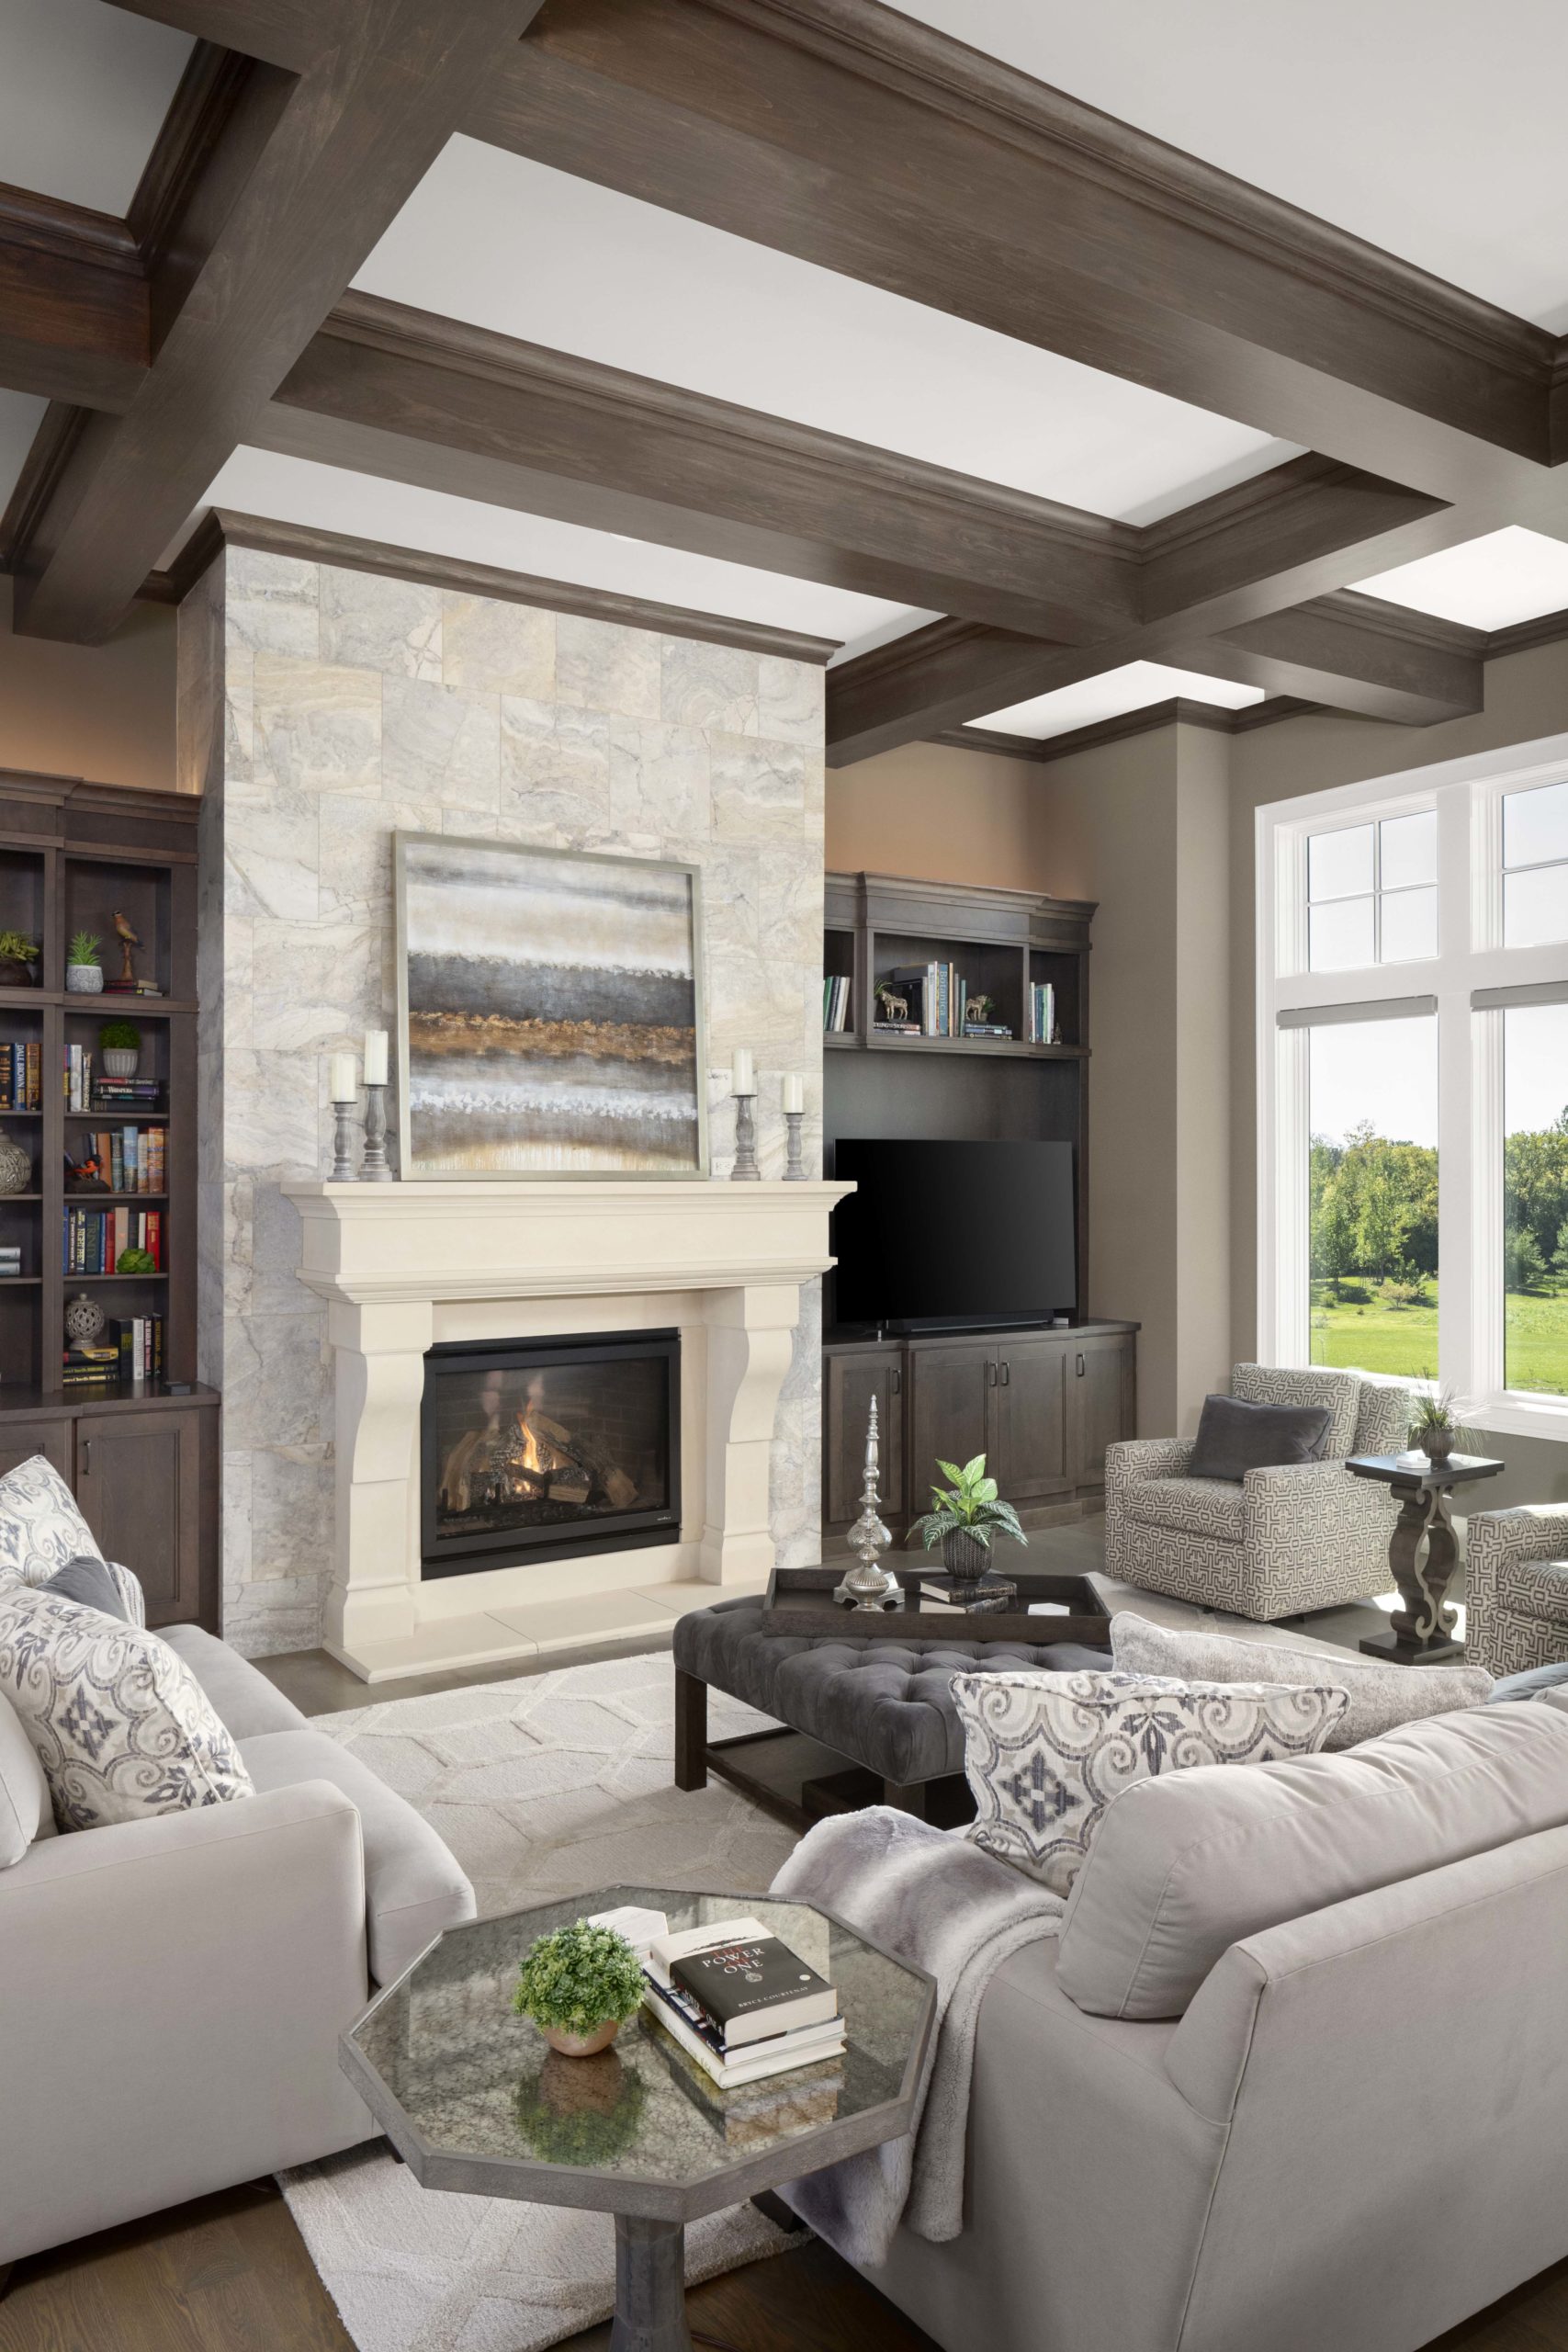 A prairie transitional living room with couches and a fireplace in a custom home.